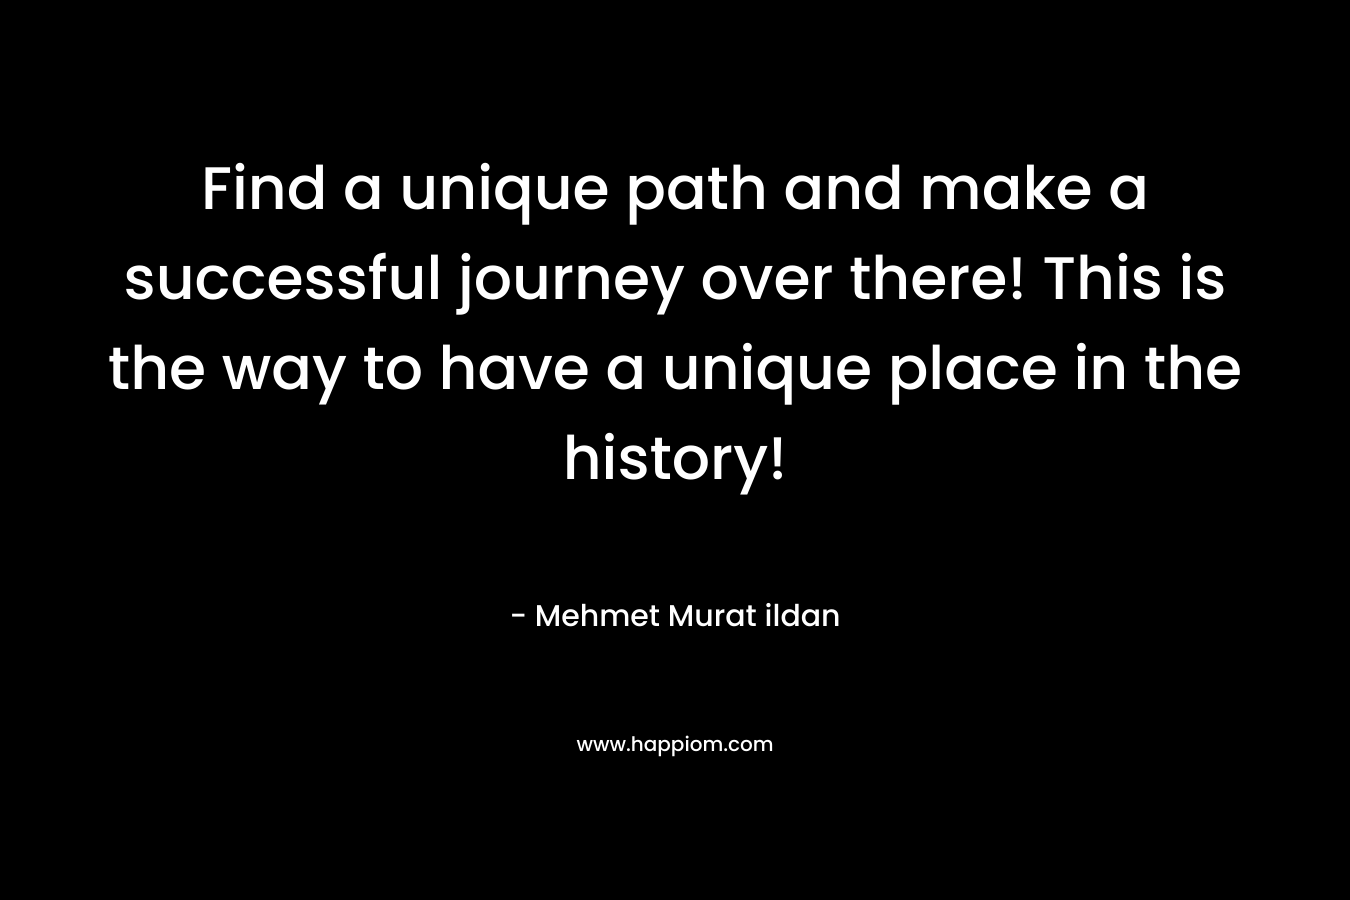 Find a unique path and make a successful journey over there! This is the way to have a unique place in the history!